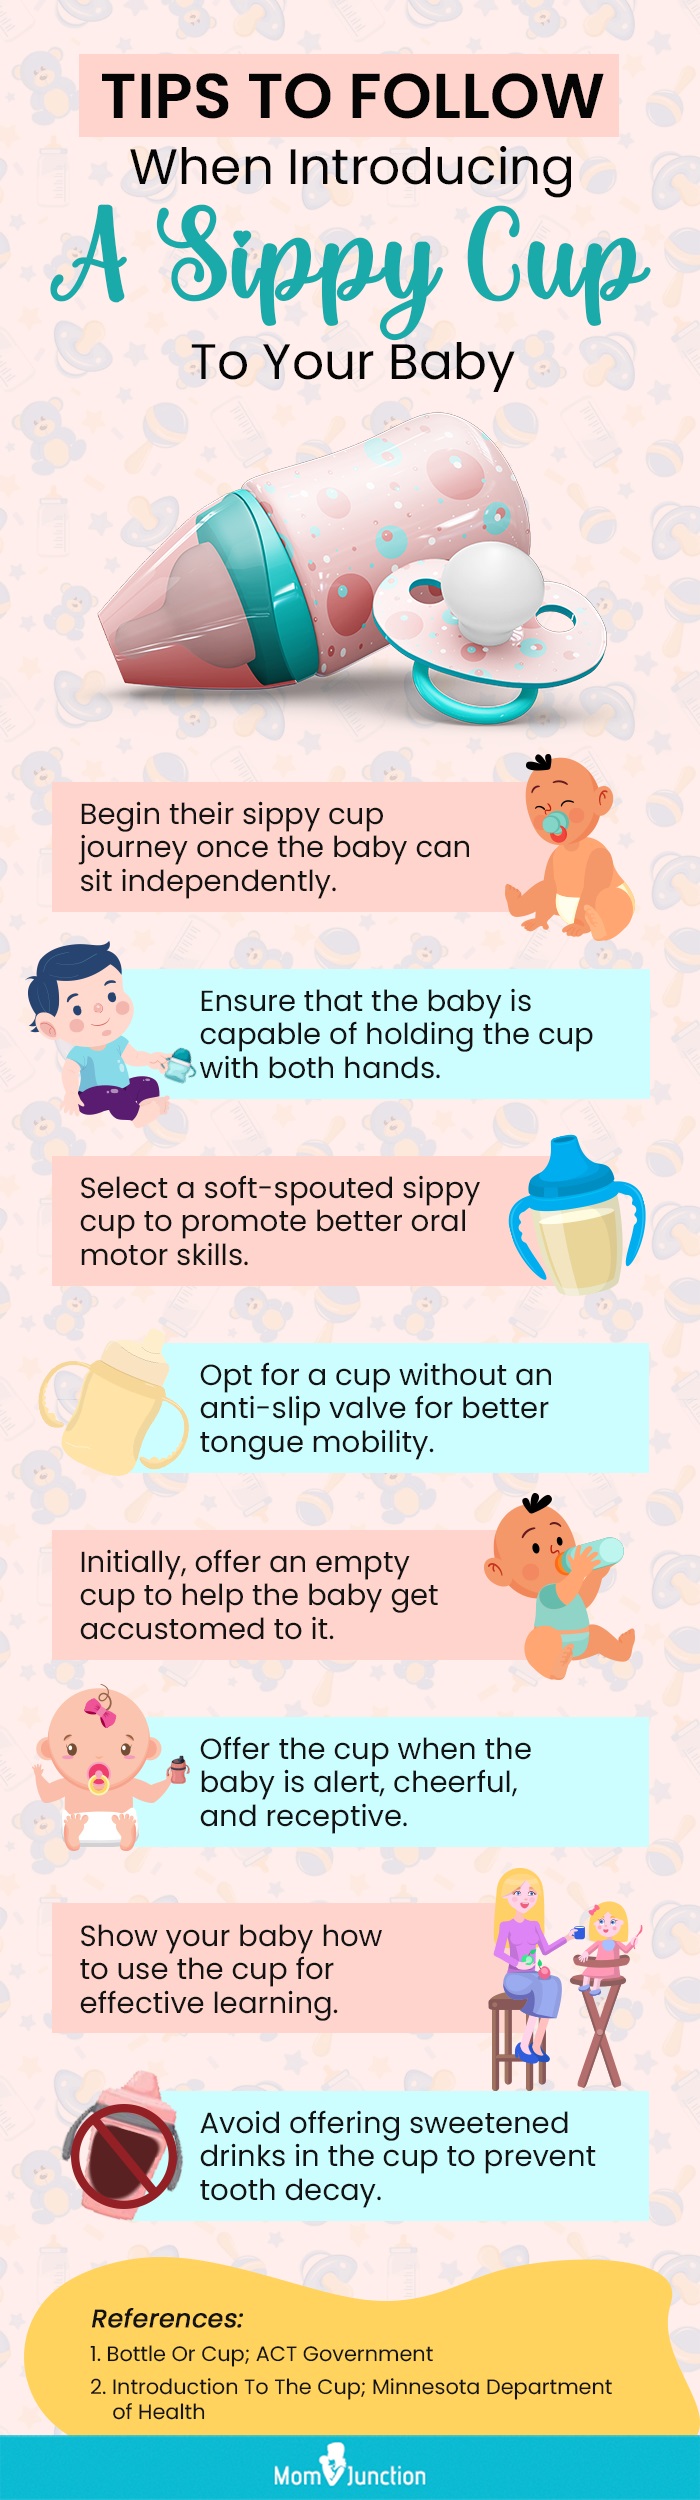 https://www.momjunction.com/wp-content/uploads/2023/06/Tips-To-Follow-When-Introducing-A-Sippy-Cup-To-Your-Baby.jpg